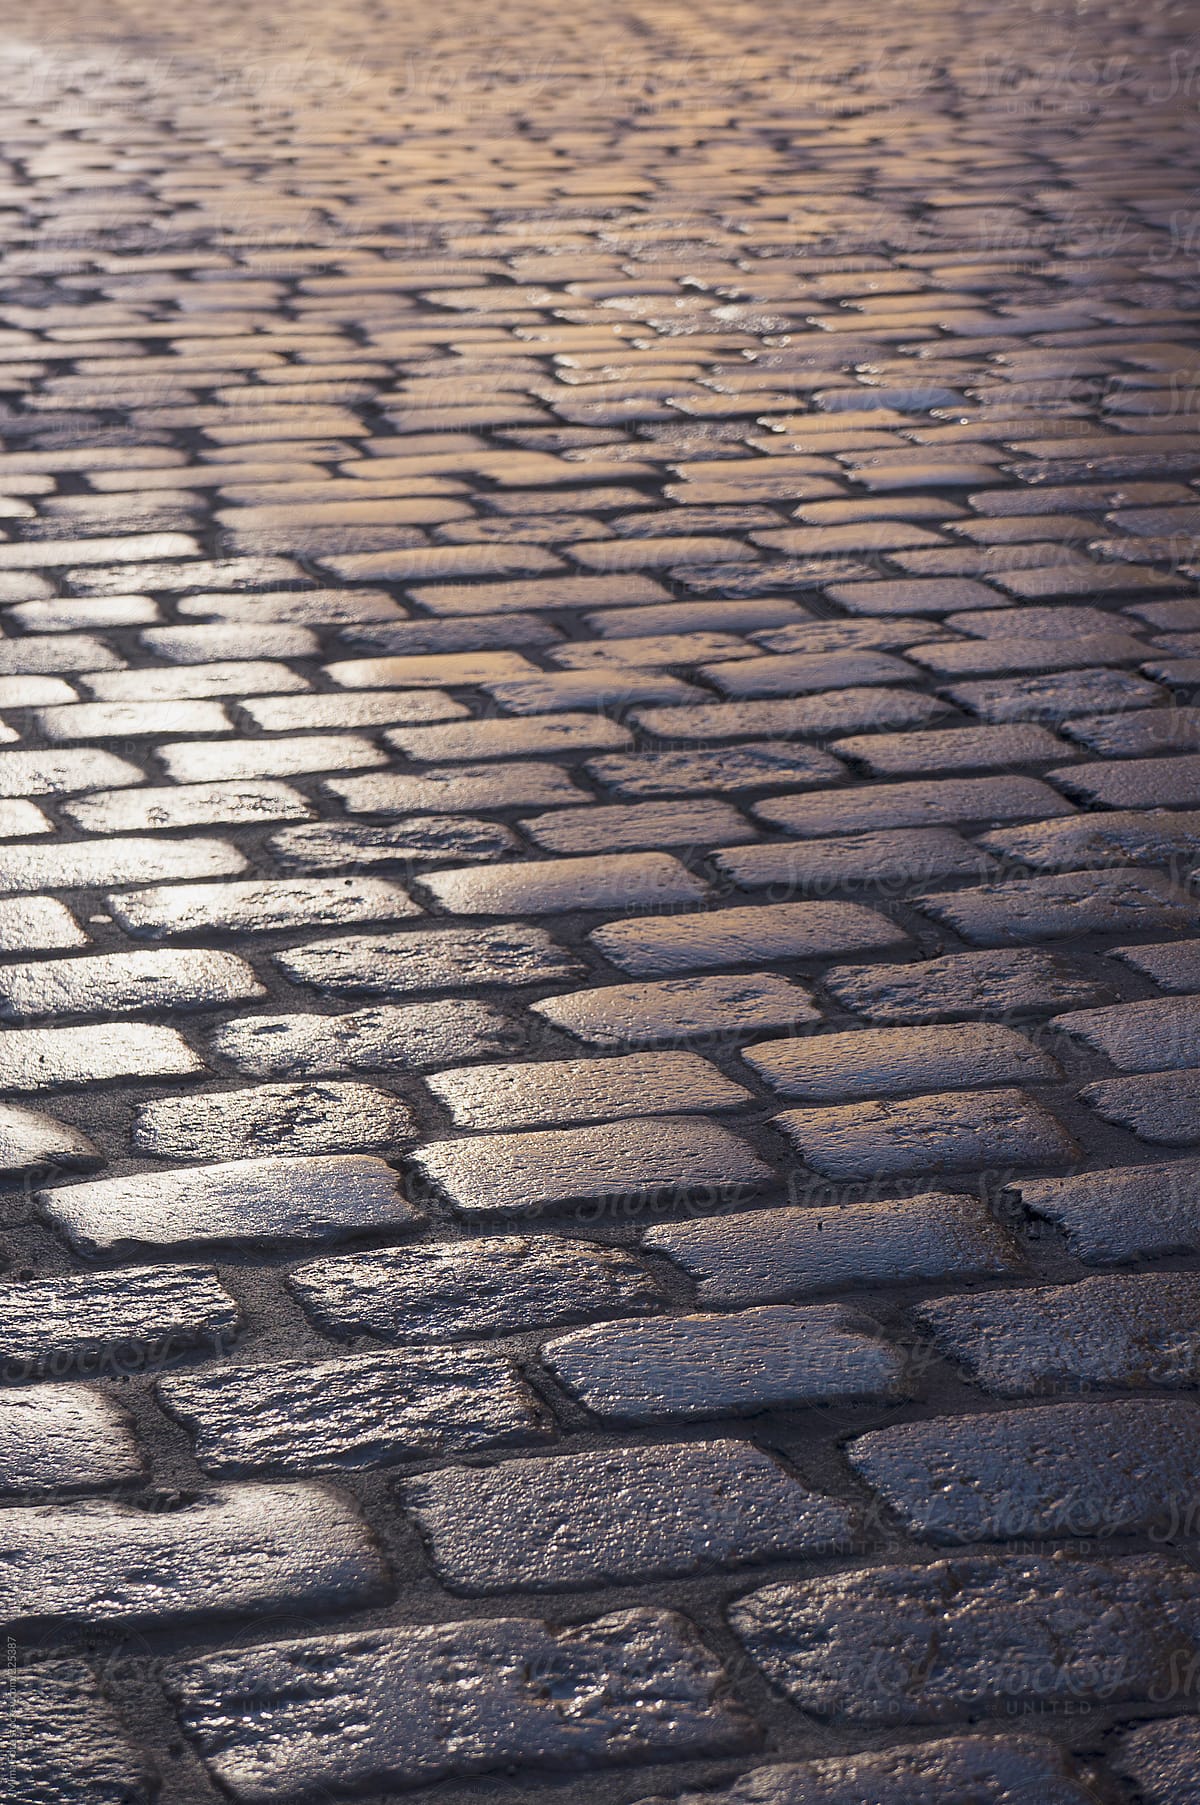 Cobblestone road, wet, backlit from the sunset